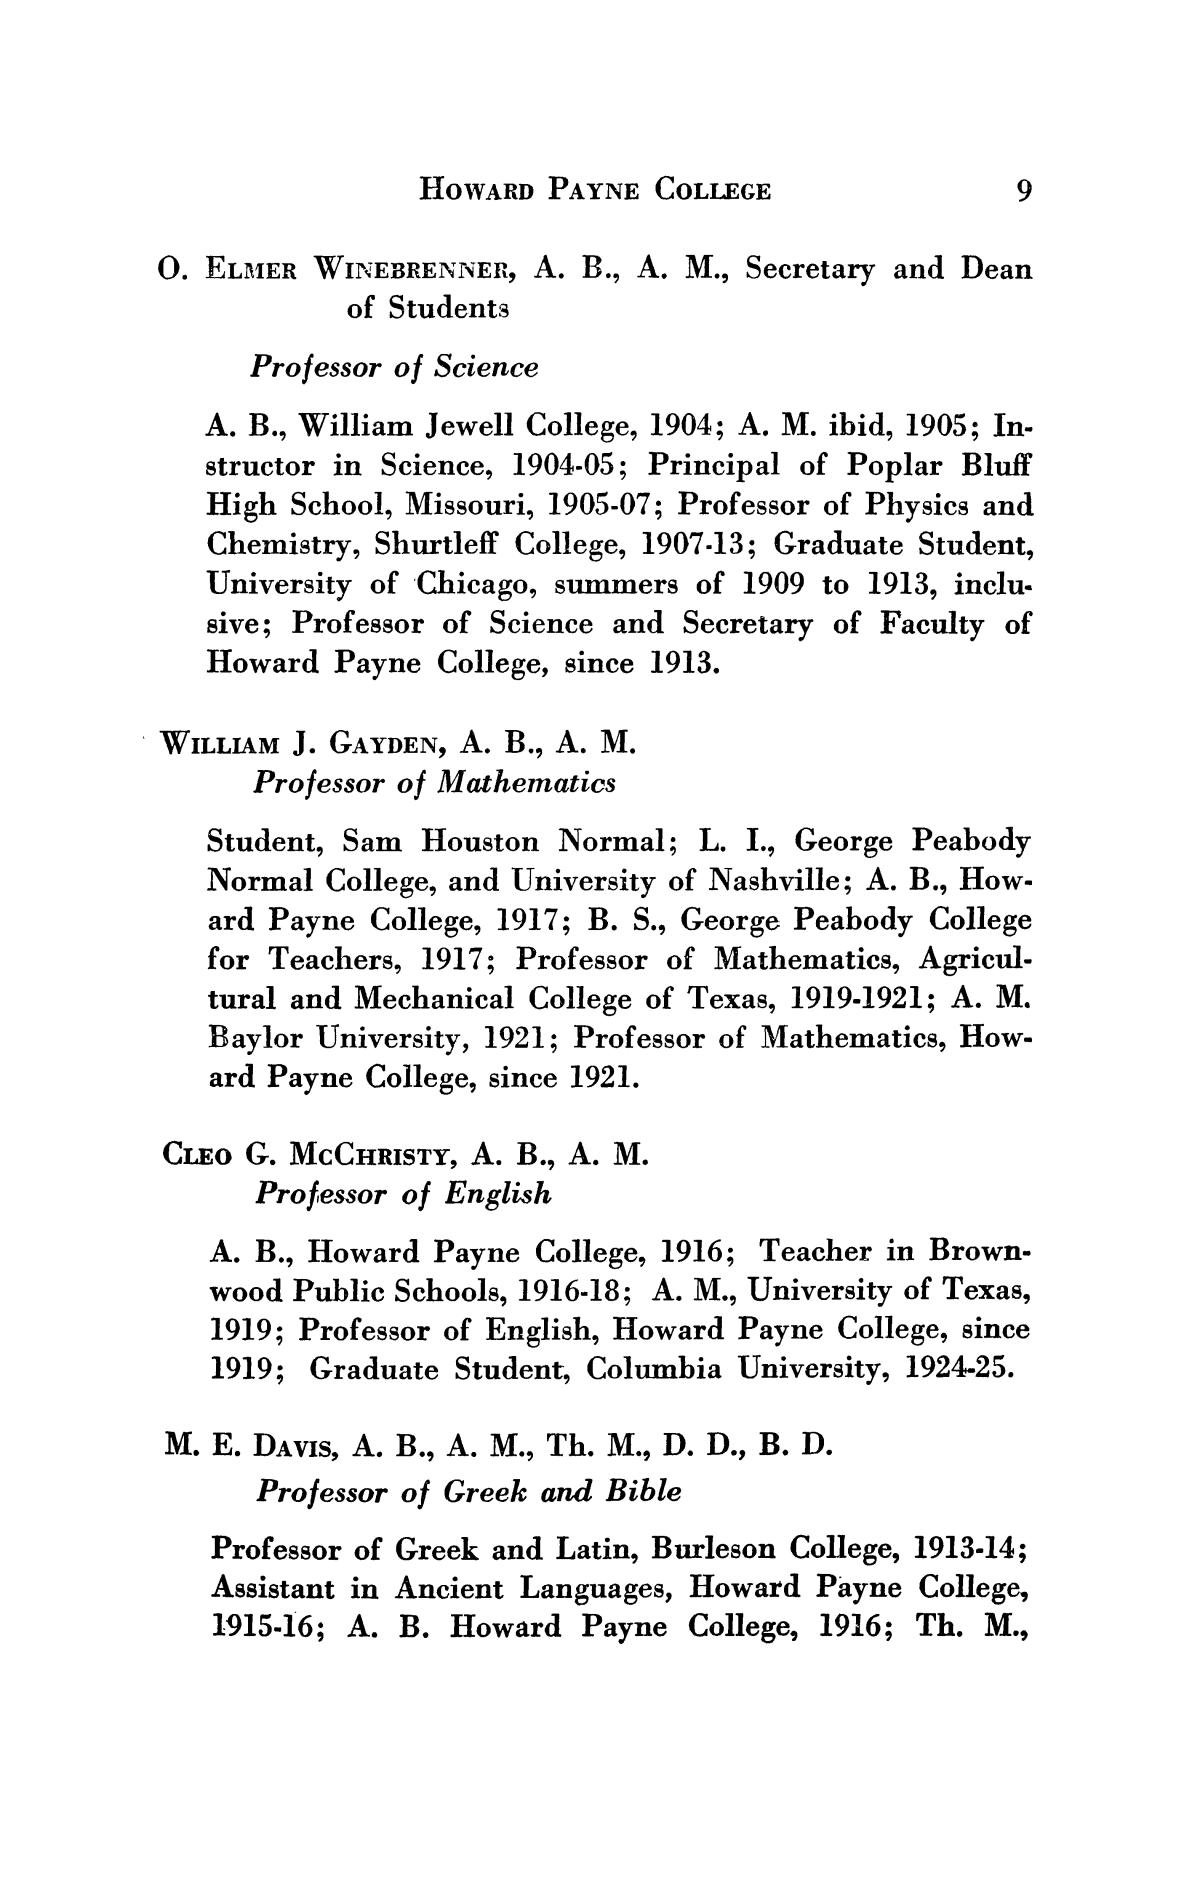 Catalogue of Howard Payne College, 1925-1926
                                                
                                                    9
                                                